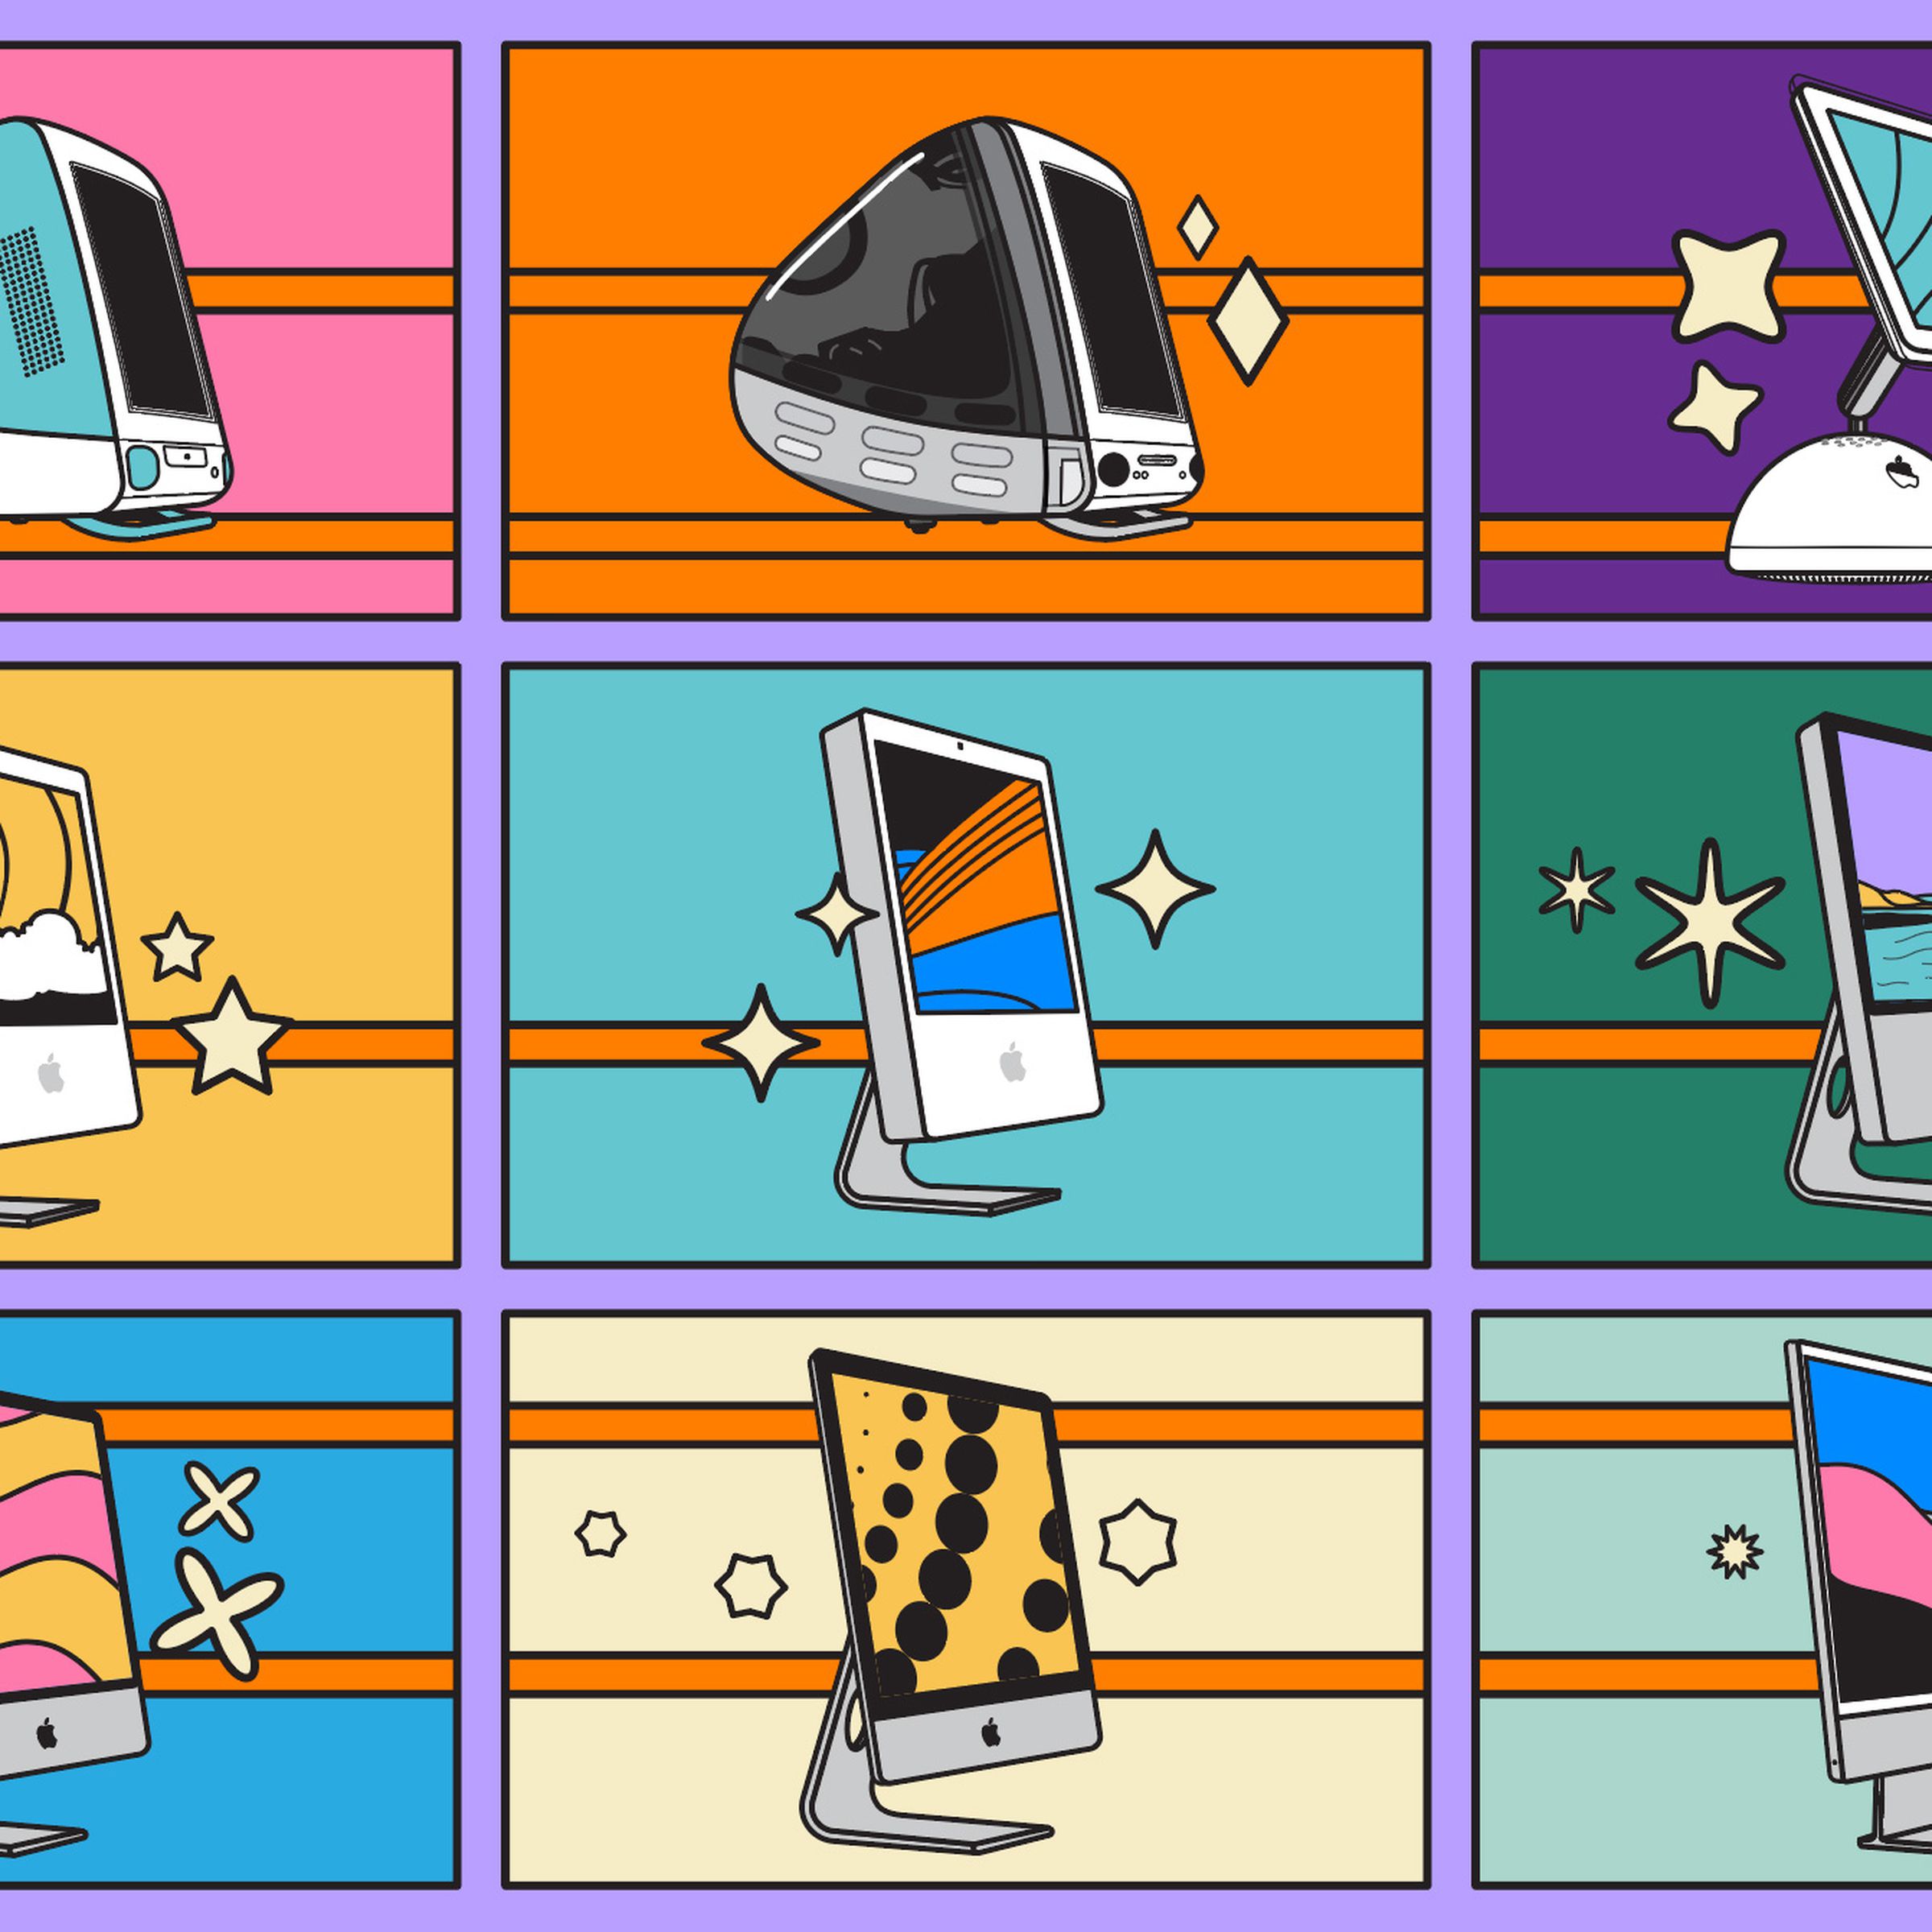 illustrations of each iMac design iteration in a grid of nine squares and a swirling line following them chronologically.